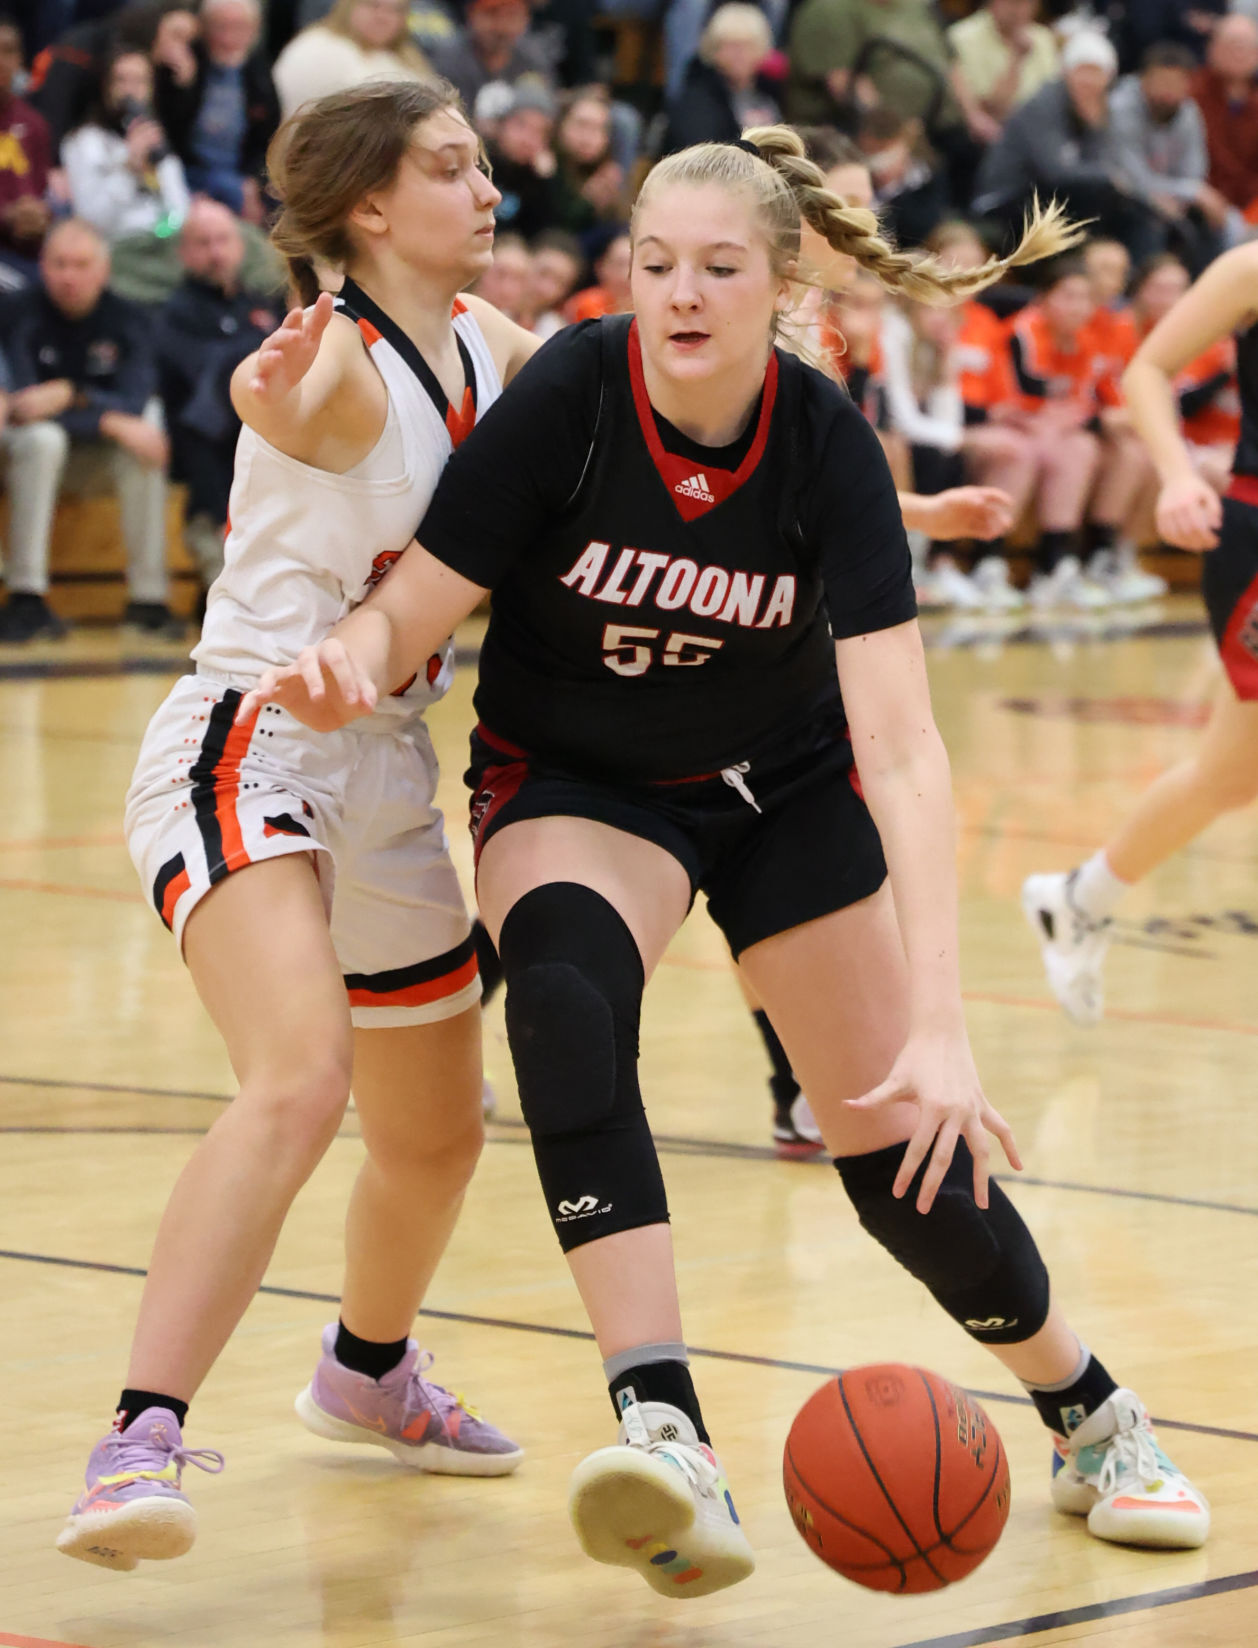 Excitement is palpable as Altoona girls prepare for start of season